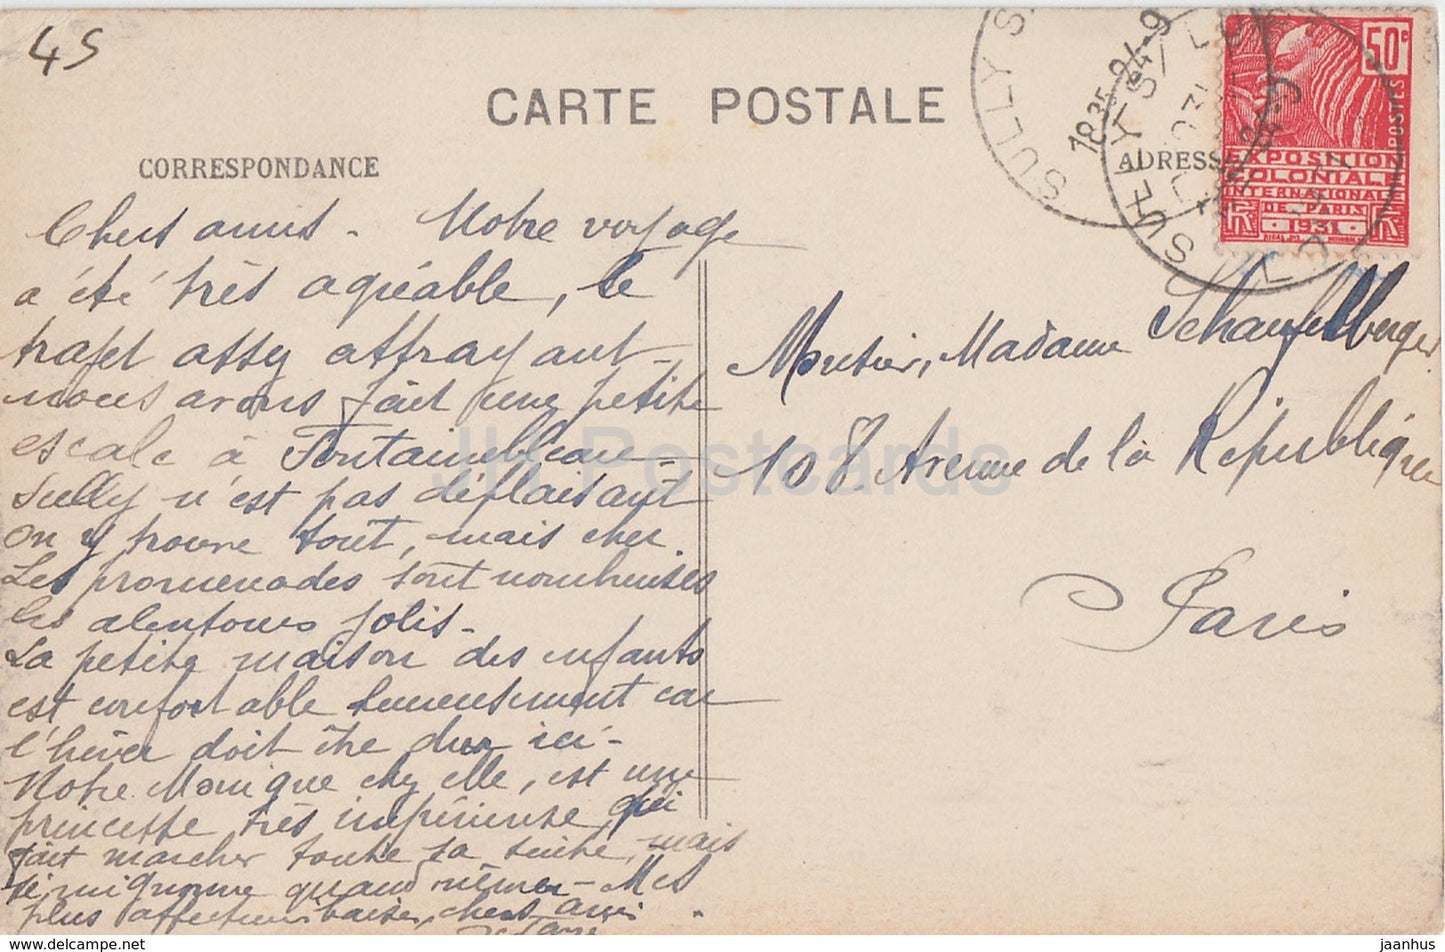 Sully Sur Loire - Chateau Feodal - Facade Nord Est - castle - 461 - old postcard - France - used